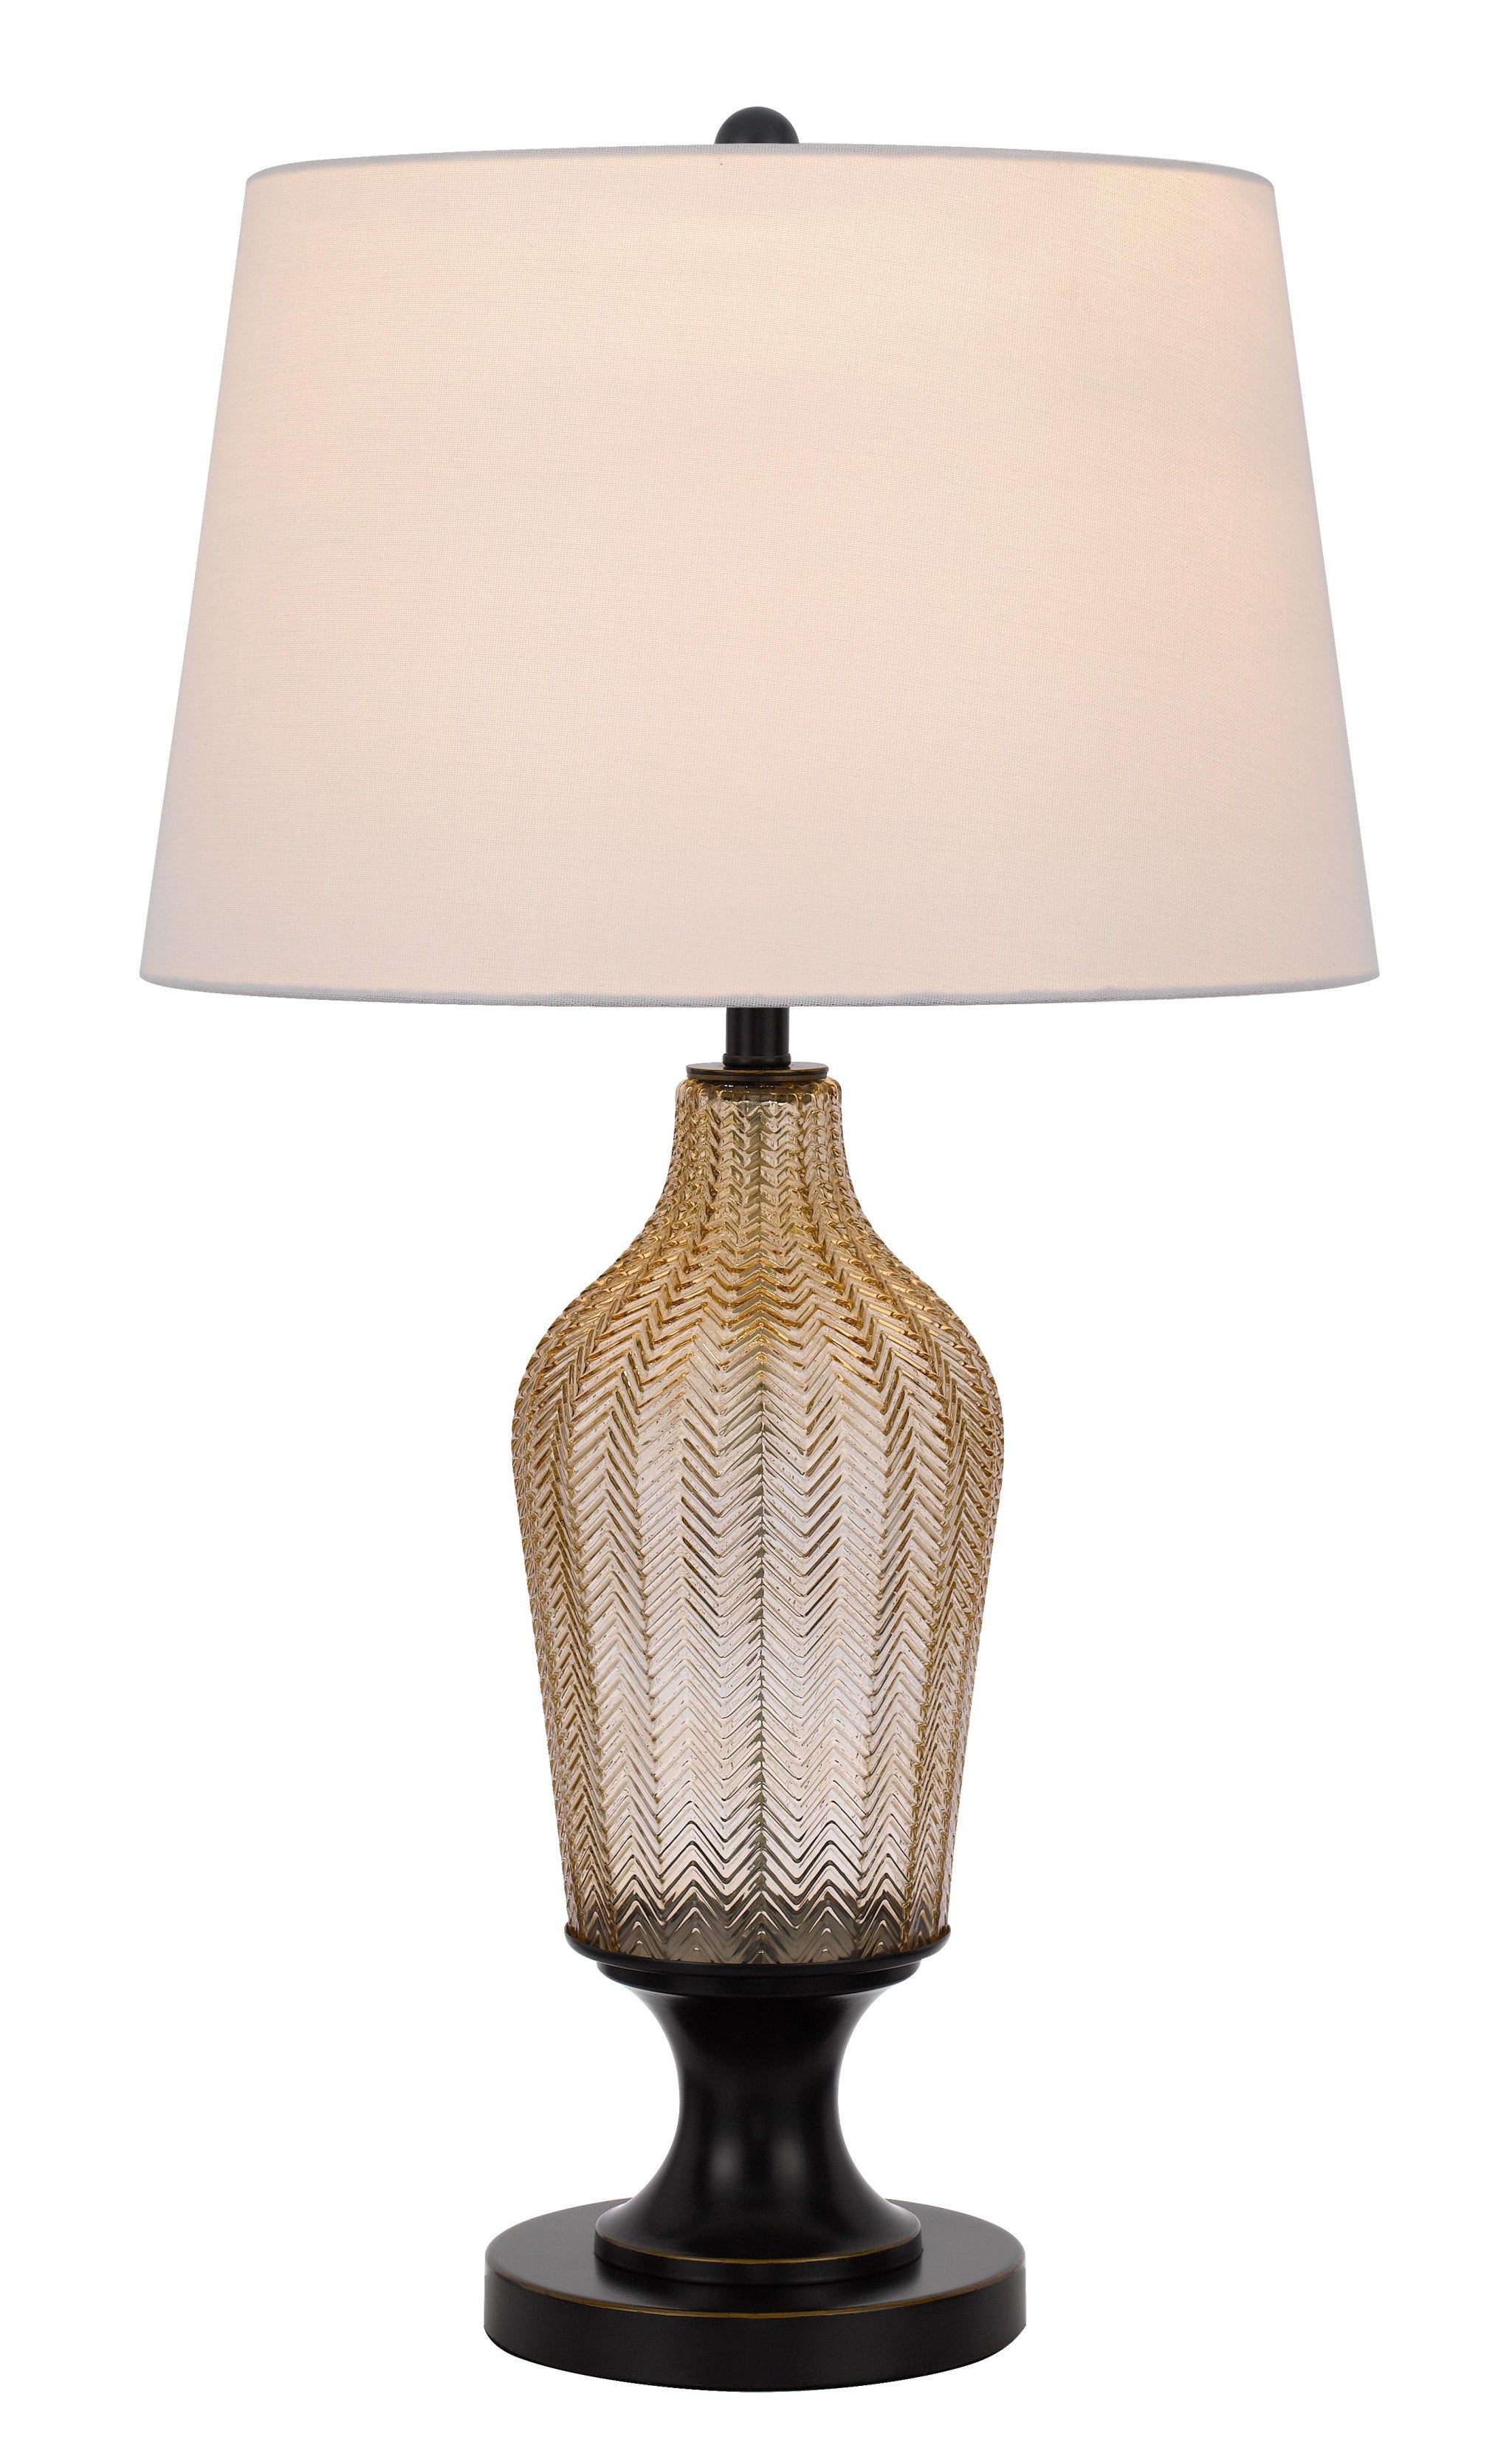 31" Bronze Glass Table Lamp With White Empire Shade